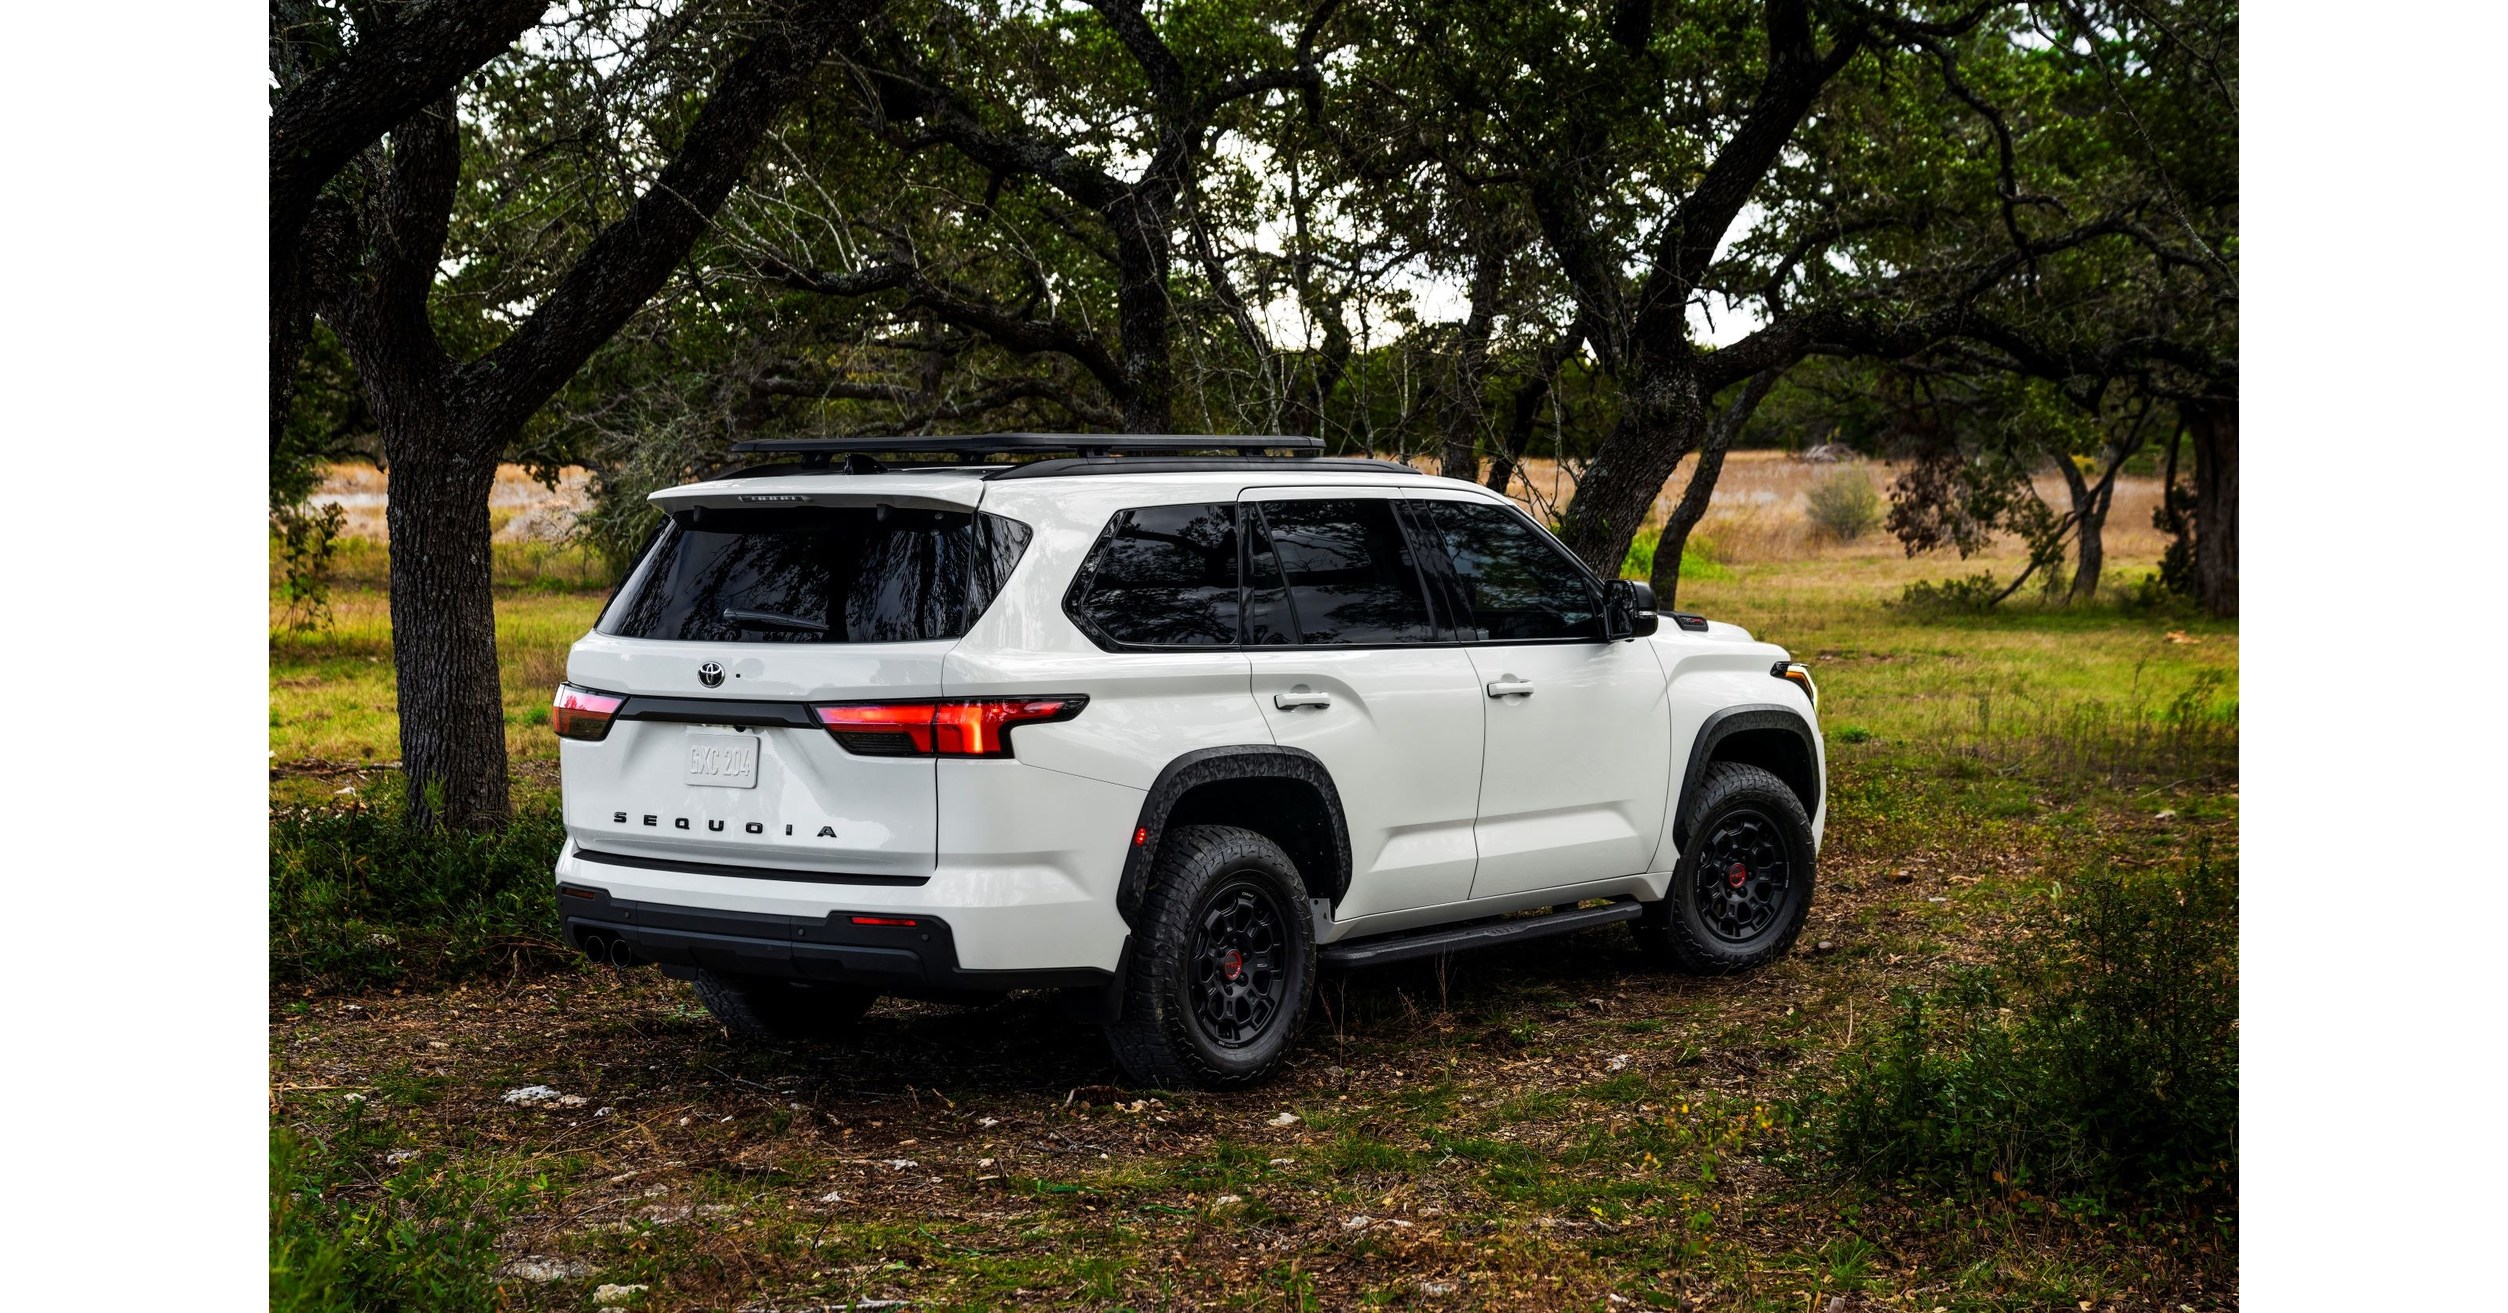 Standing tall: All-new 2023 Sequoia full-size SUV is ready to make its mark